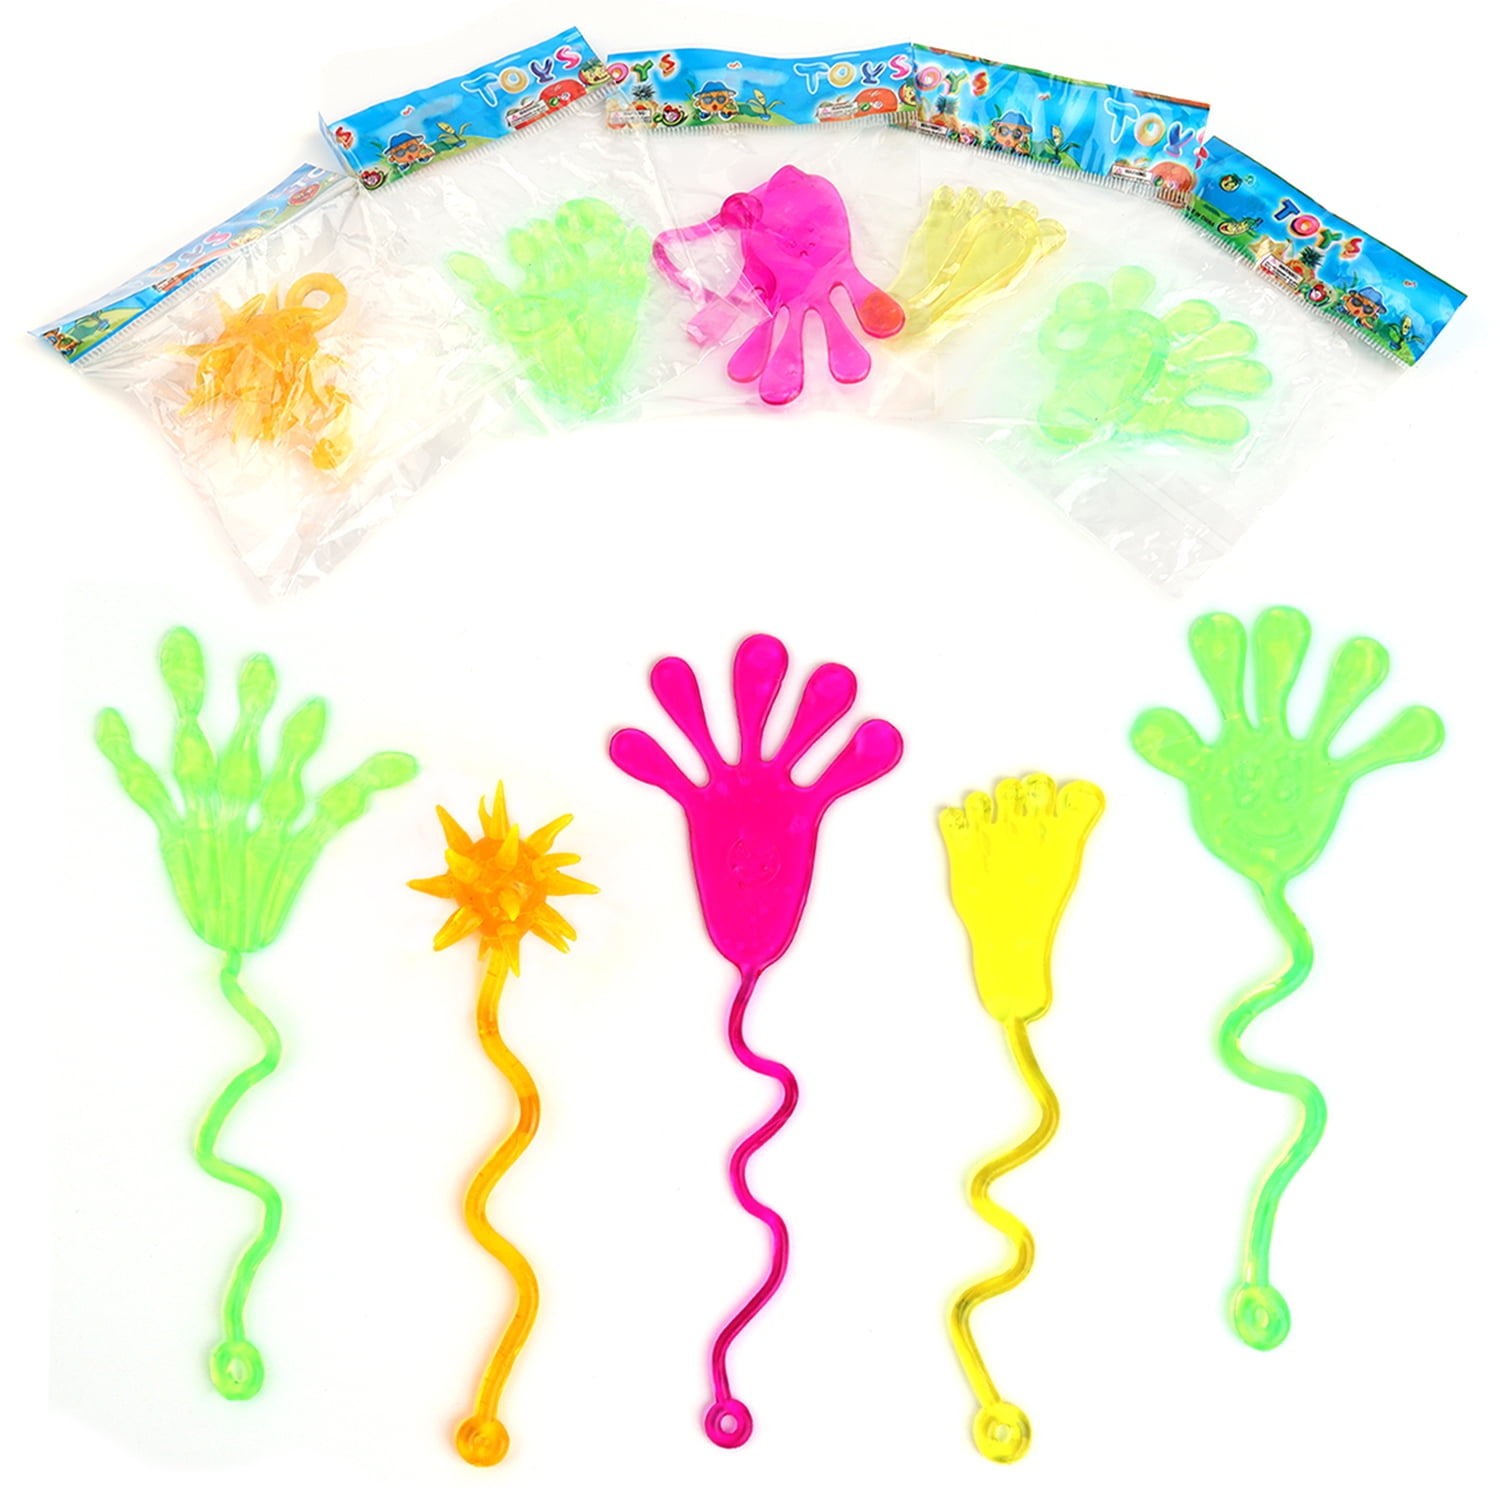  FLMRIOY 50 Pcs Glitter Sticky Hands Toys for Kids, Stretchy  Hands Valentine's Day Party Favors for Treasure Box Fillers and Classroom  Prizes, Goodie Bag Stuffers : Toys & Games